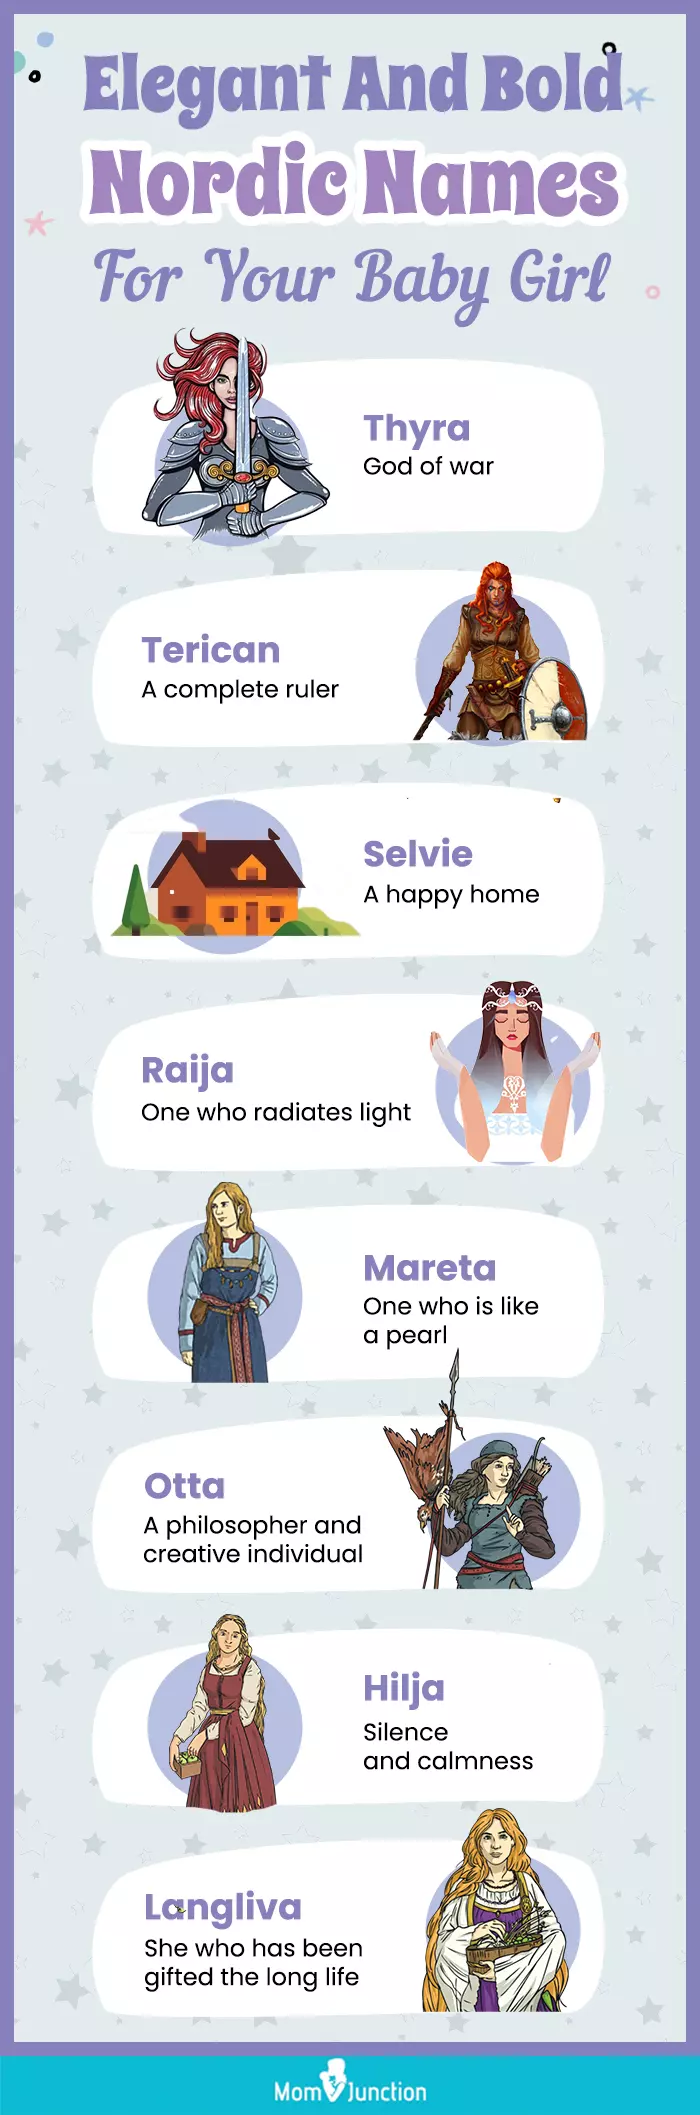 elegant and bold nordic names for your baby girl (infographic)